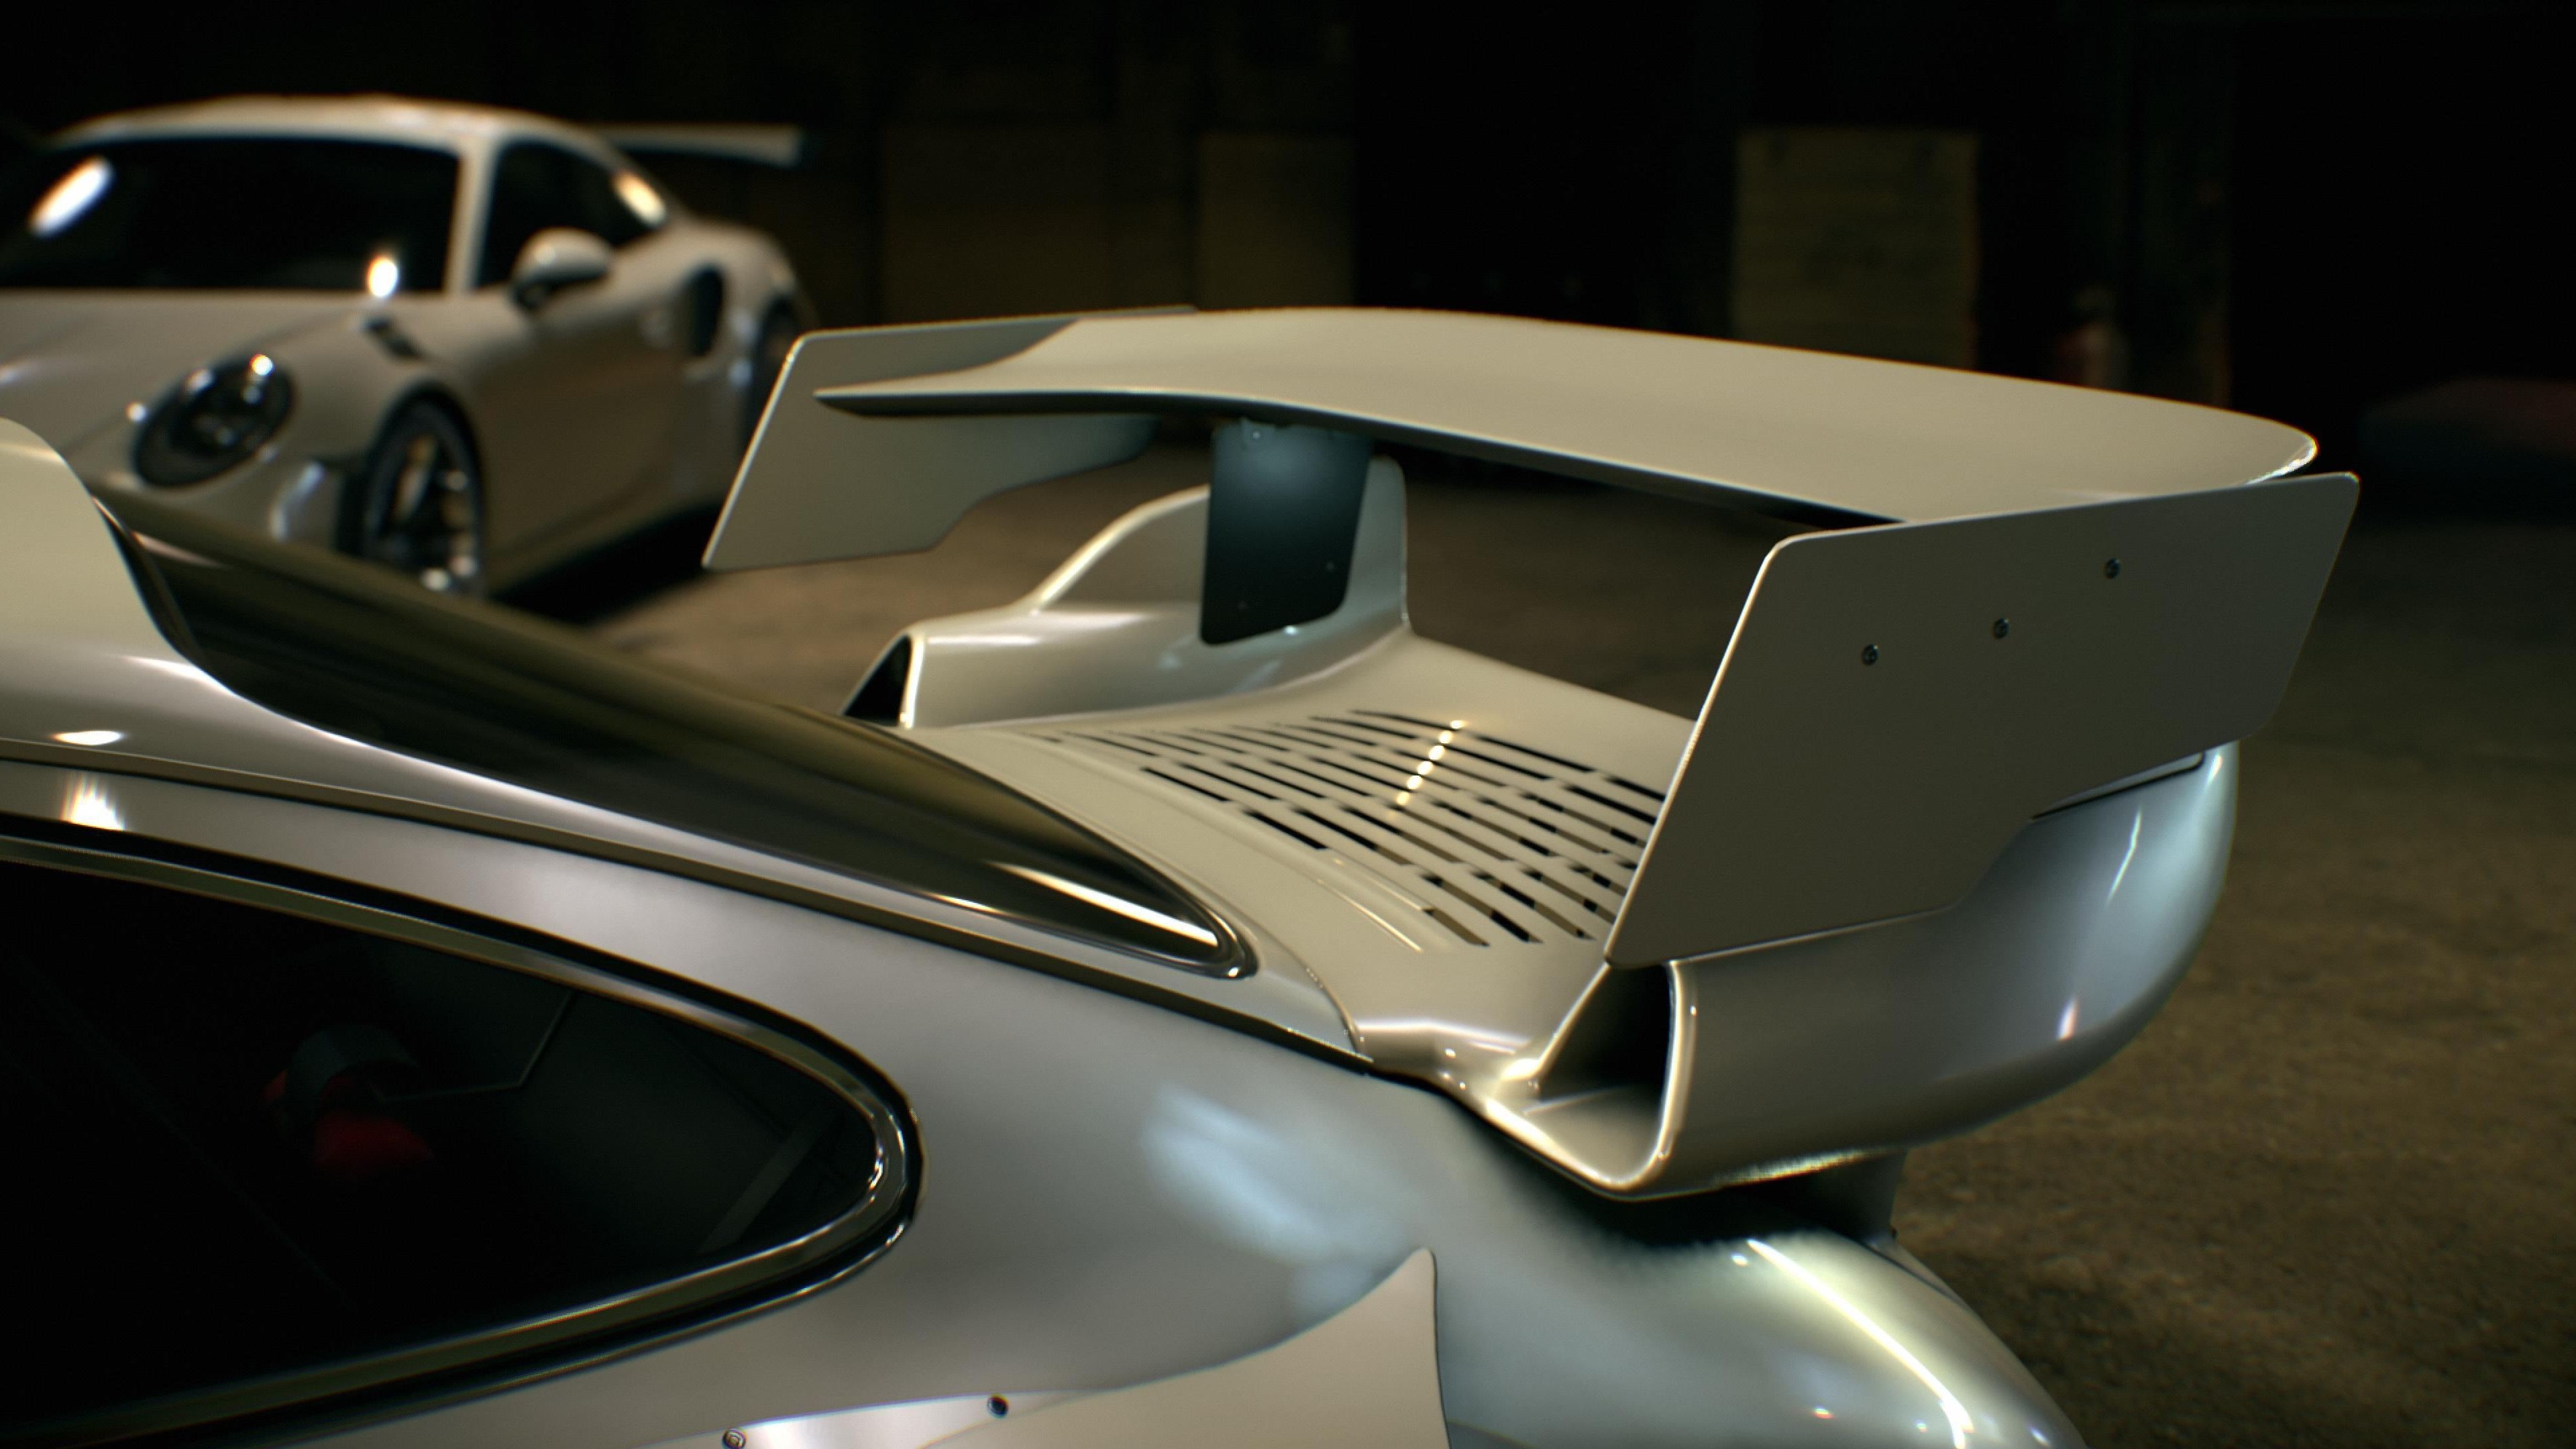 Need For Speed Porsche Spoiler for 3840 x 2160 Ultra HD resolution